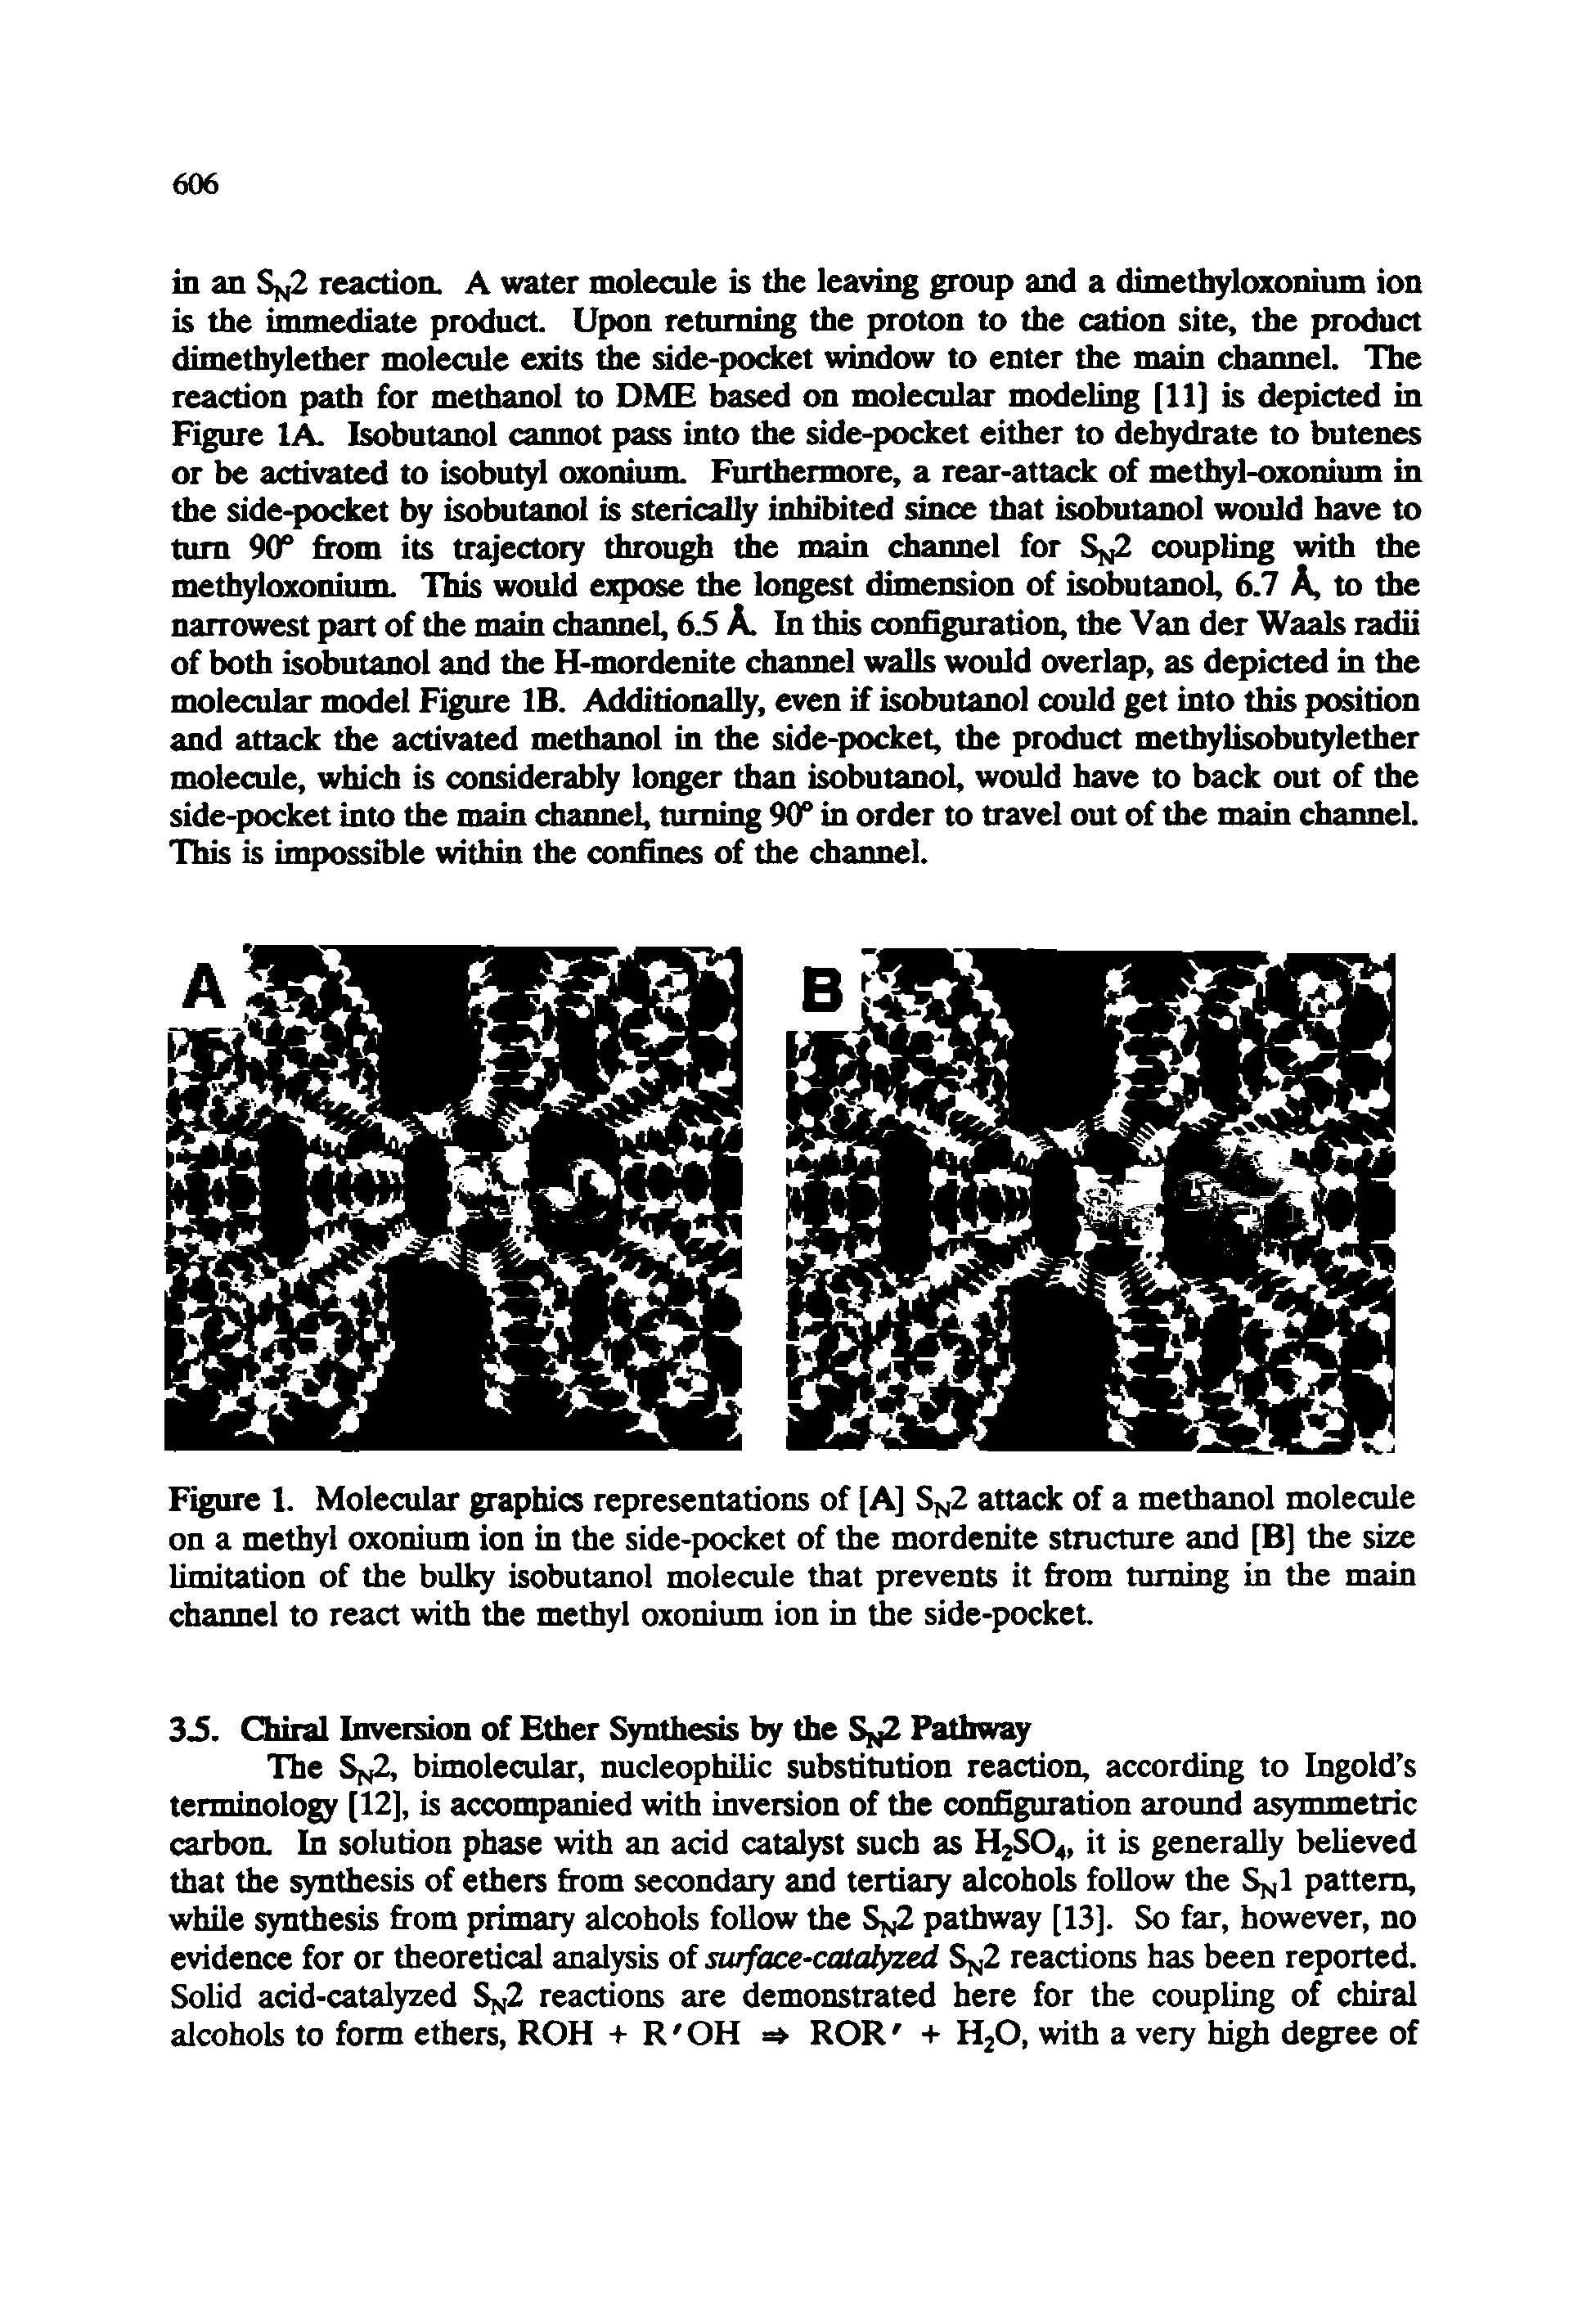 Figure 1. Molecular graphics representations of [A] S 2 attack of a methanol molecule on a methyl oxonium ion in the side-pocket of the mordenite structure and [B] the size limitation of the bulky isobutanol molecule that prevents it from turning in the main channel to react with the methyl oxonium ion in the side-pocket.